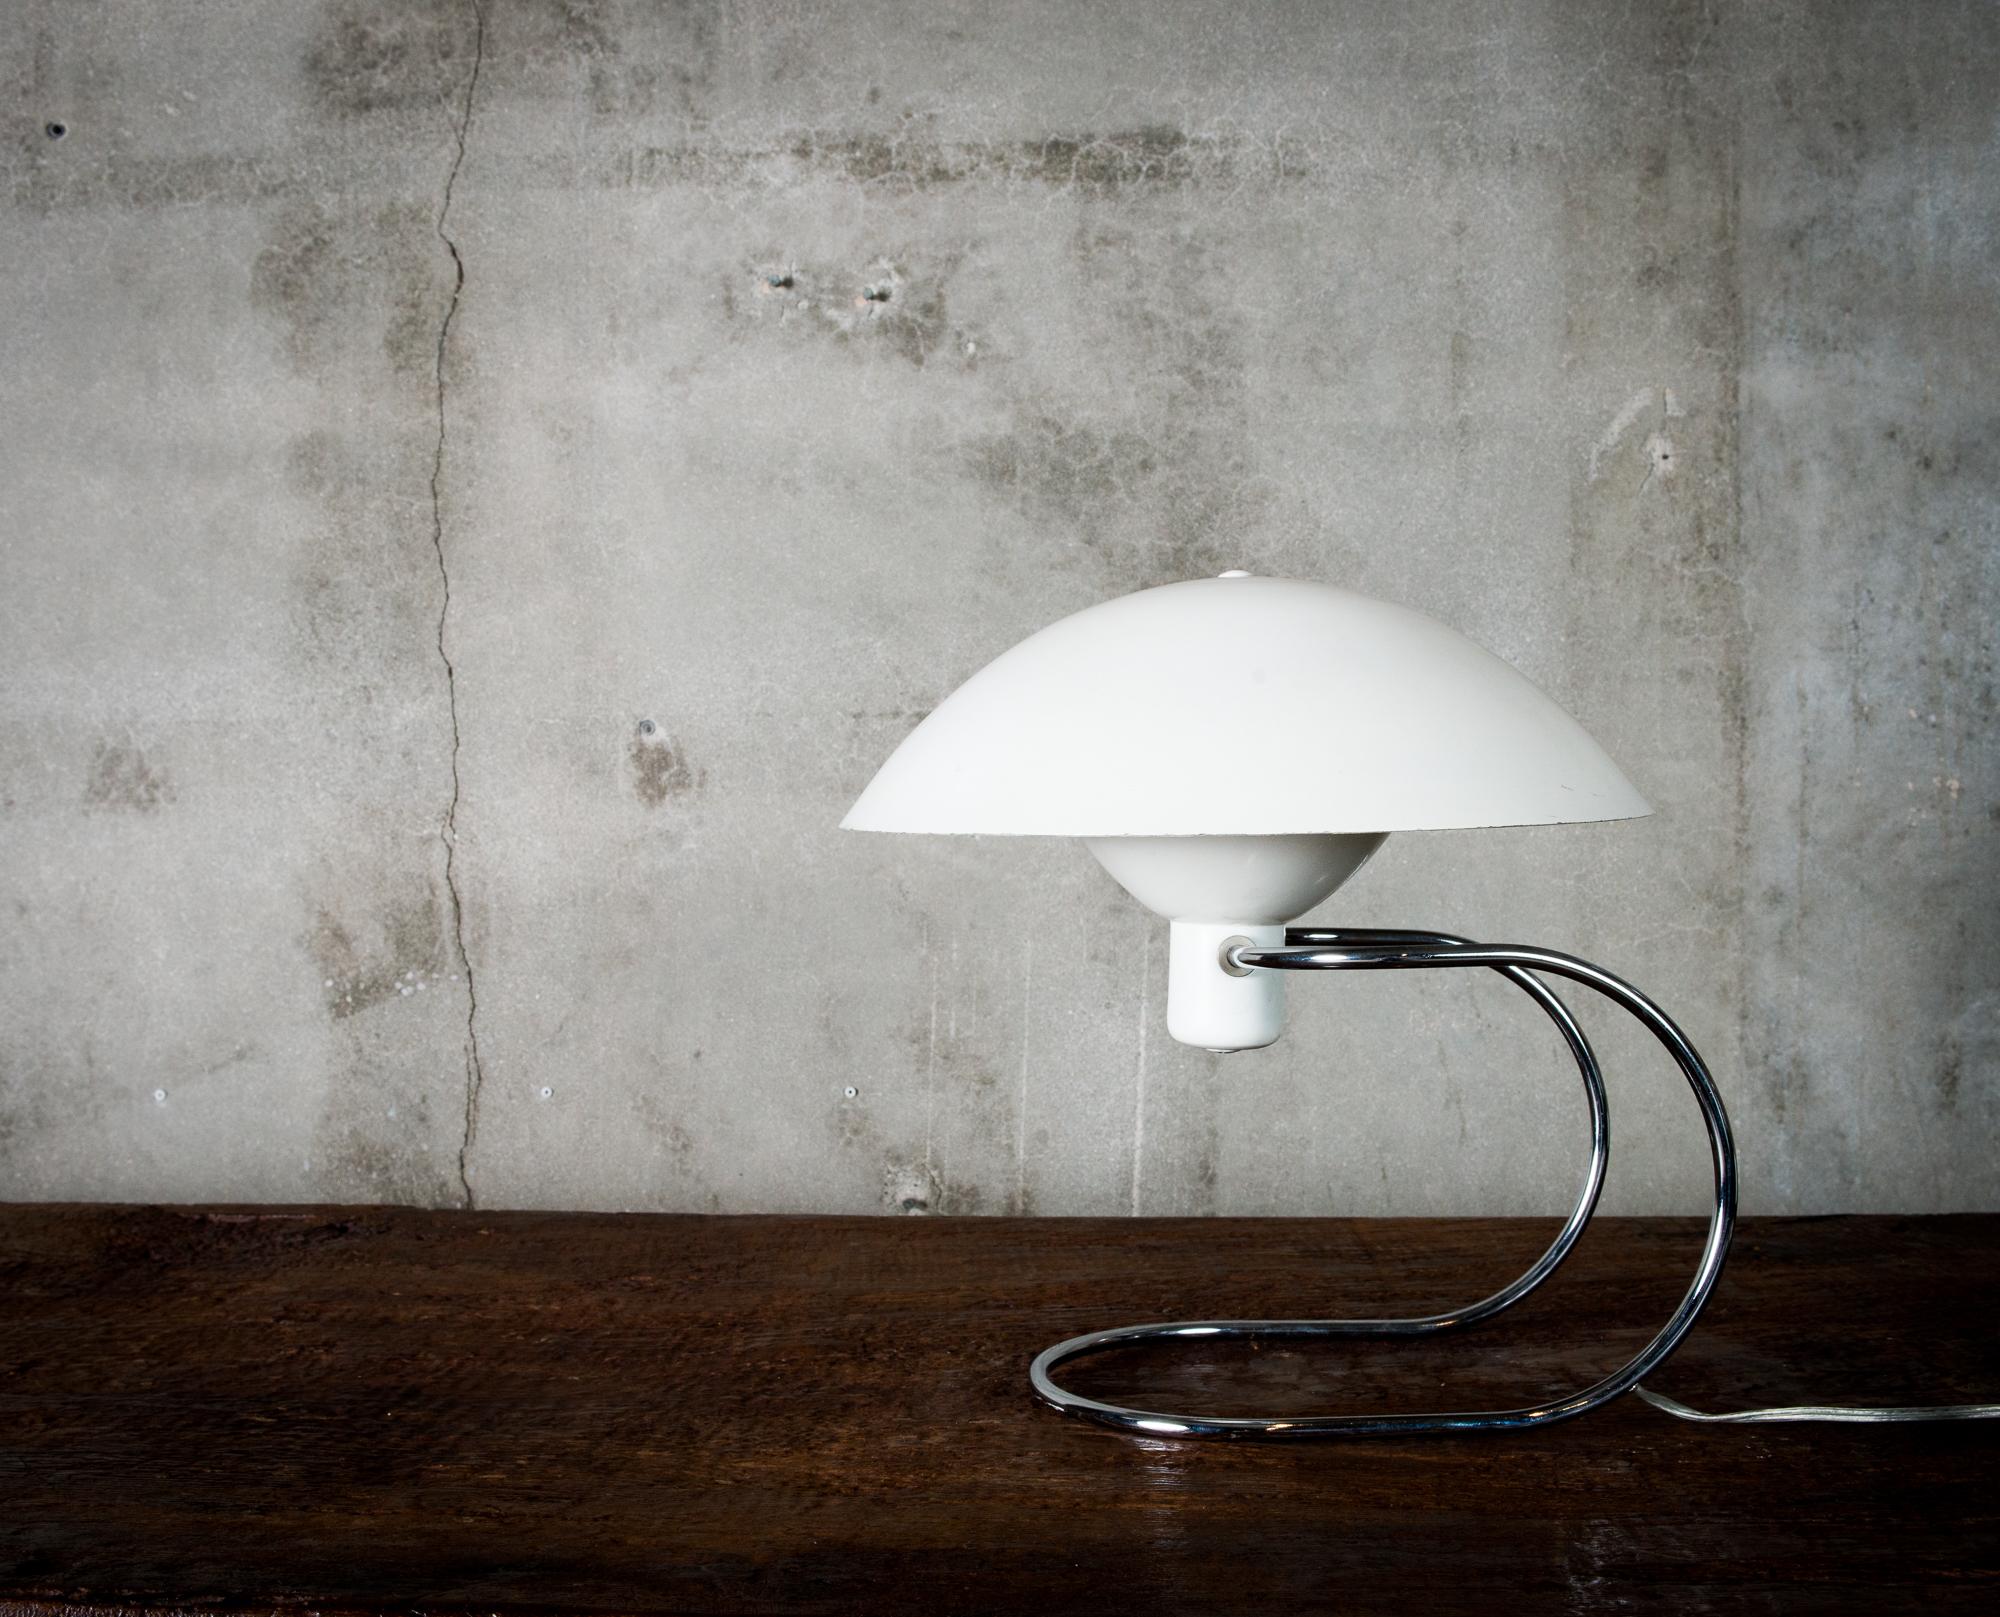 One Greta Von Nessen “Anywhere” table lamp in enameled aluminum and steel.